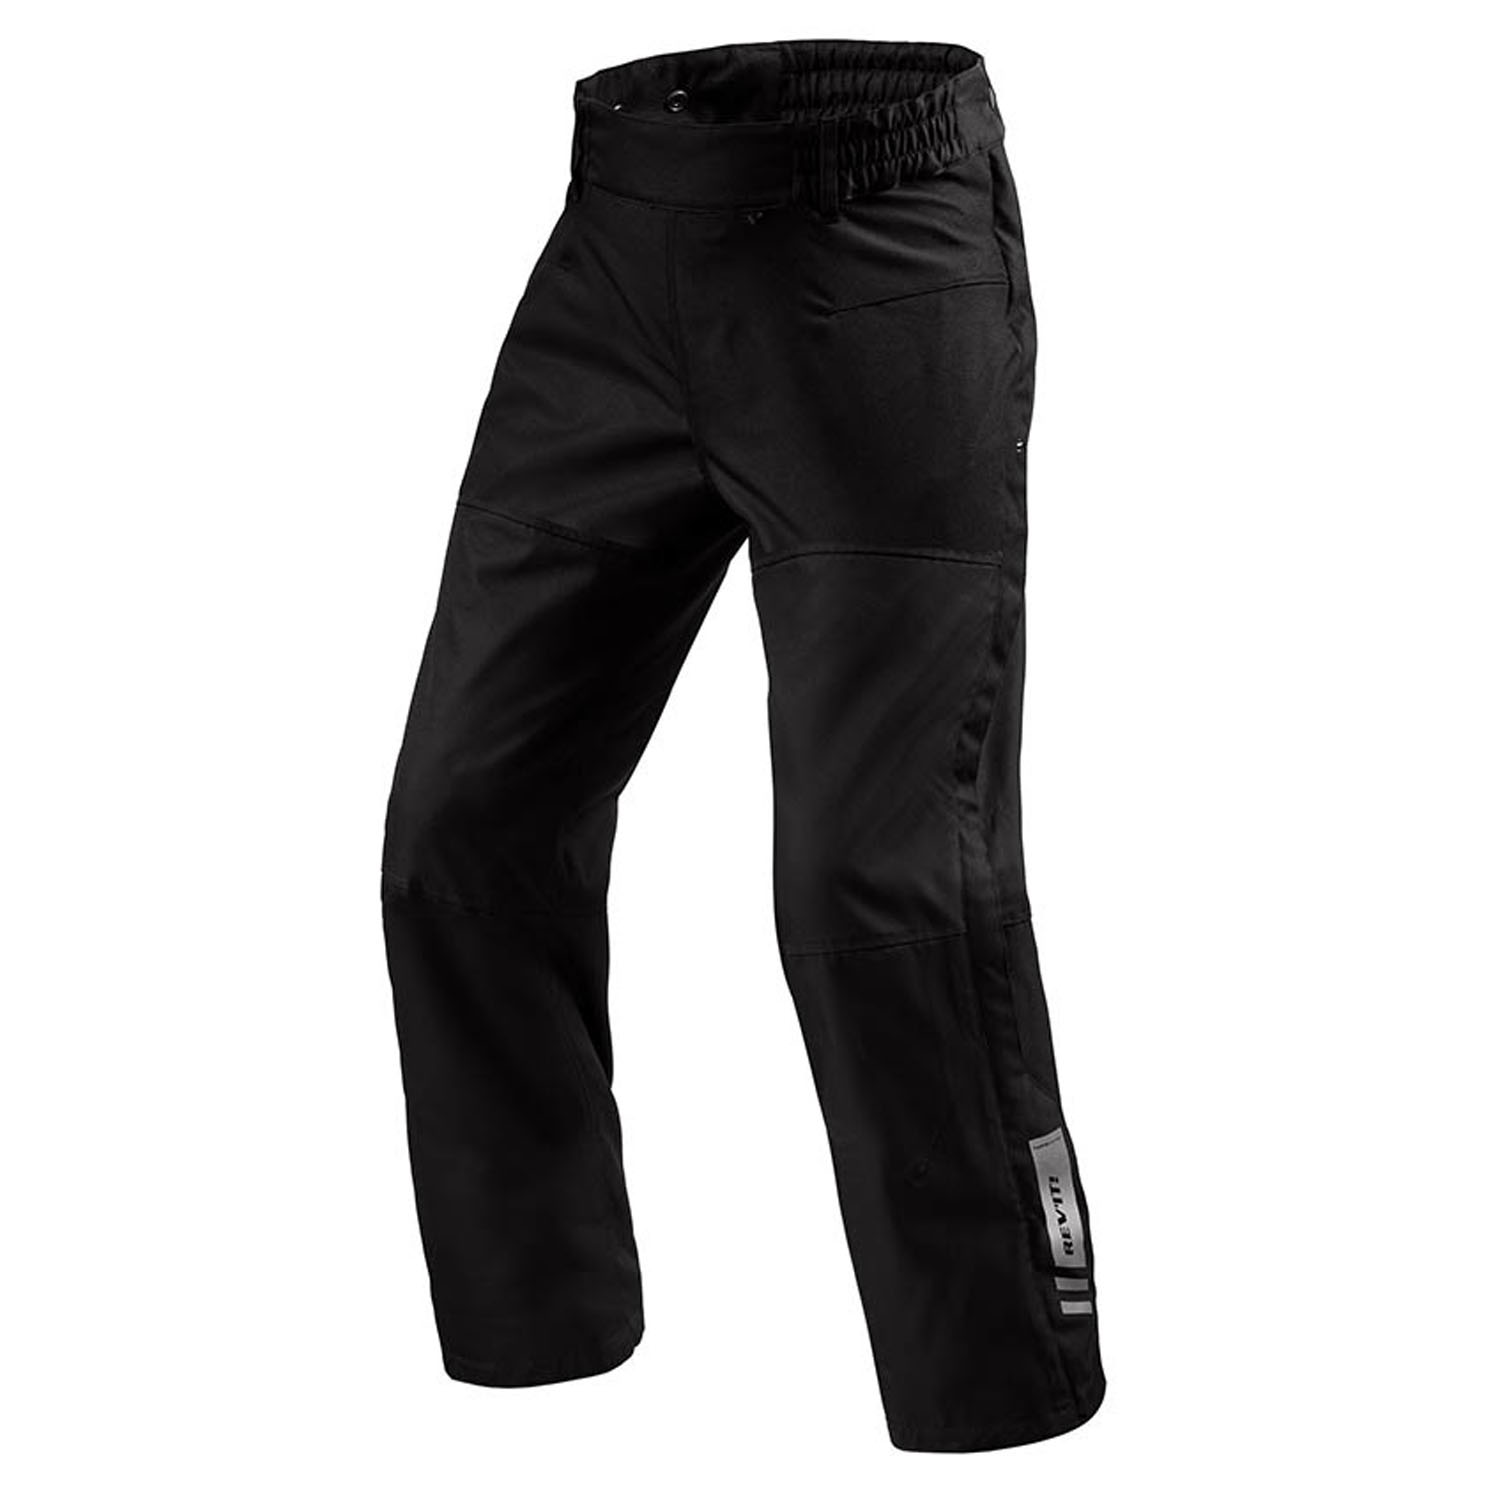 Image of EU REV'IT! Pants Axis 2 H2O Black Standard Motorcycle Pants Taille 4XL